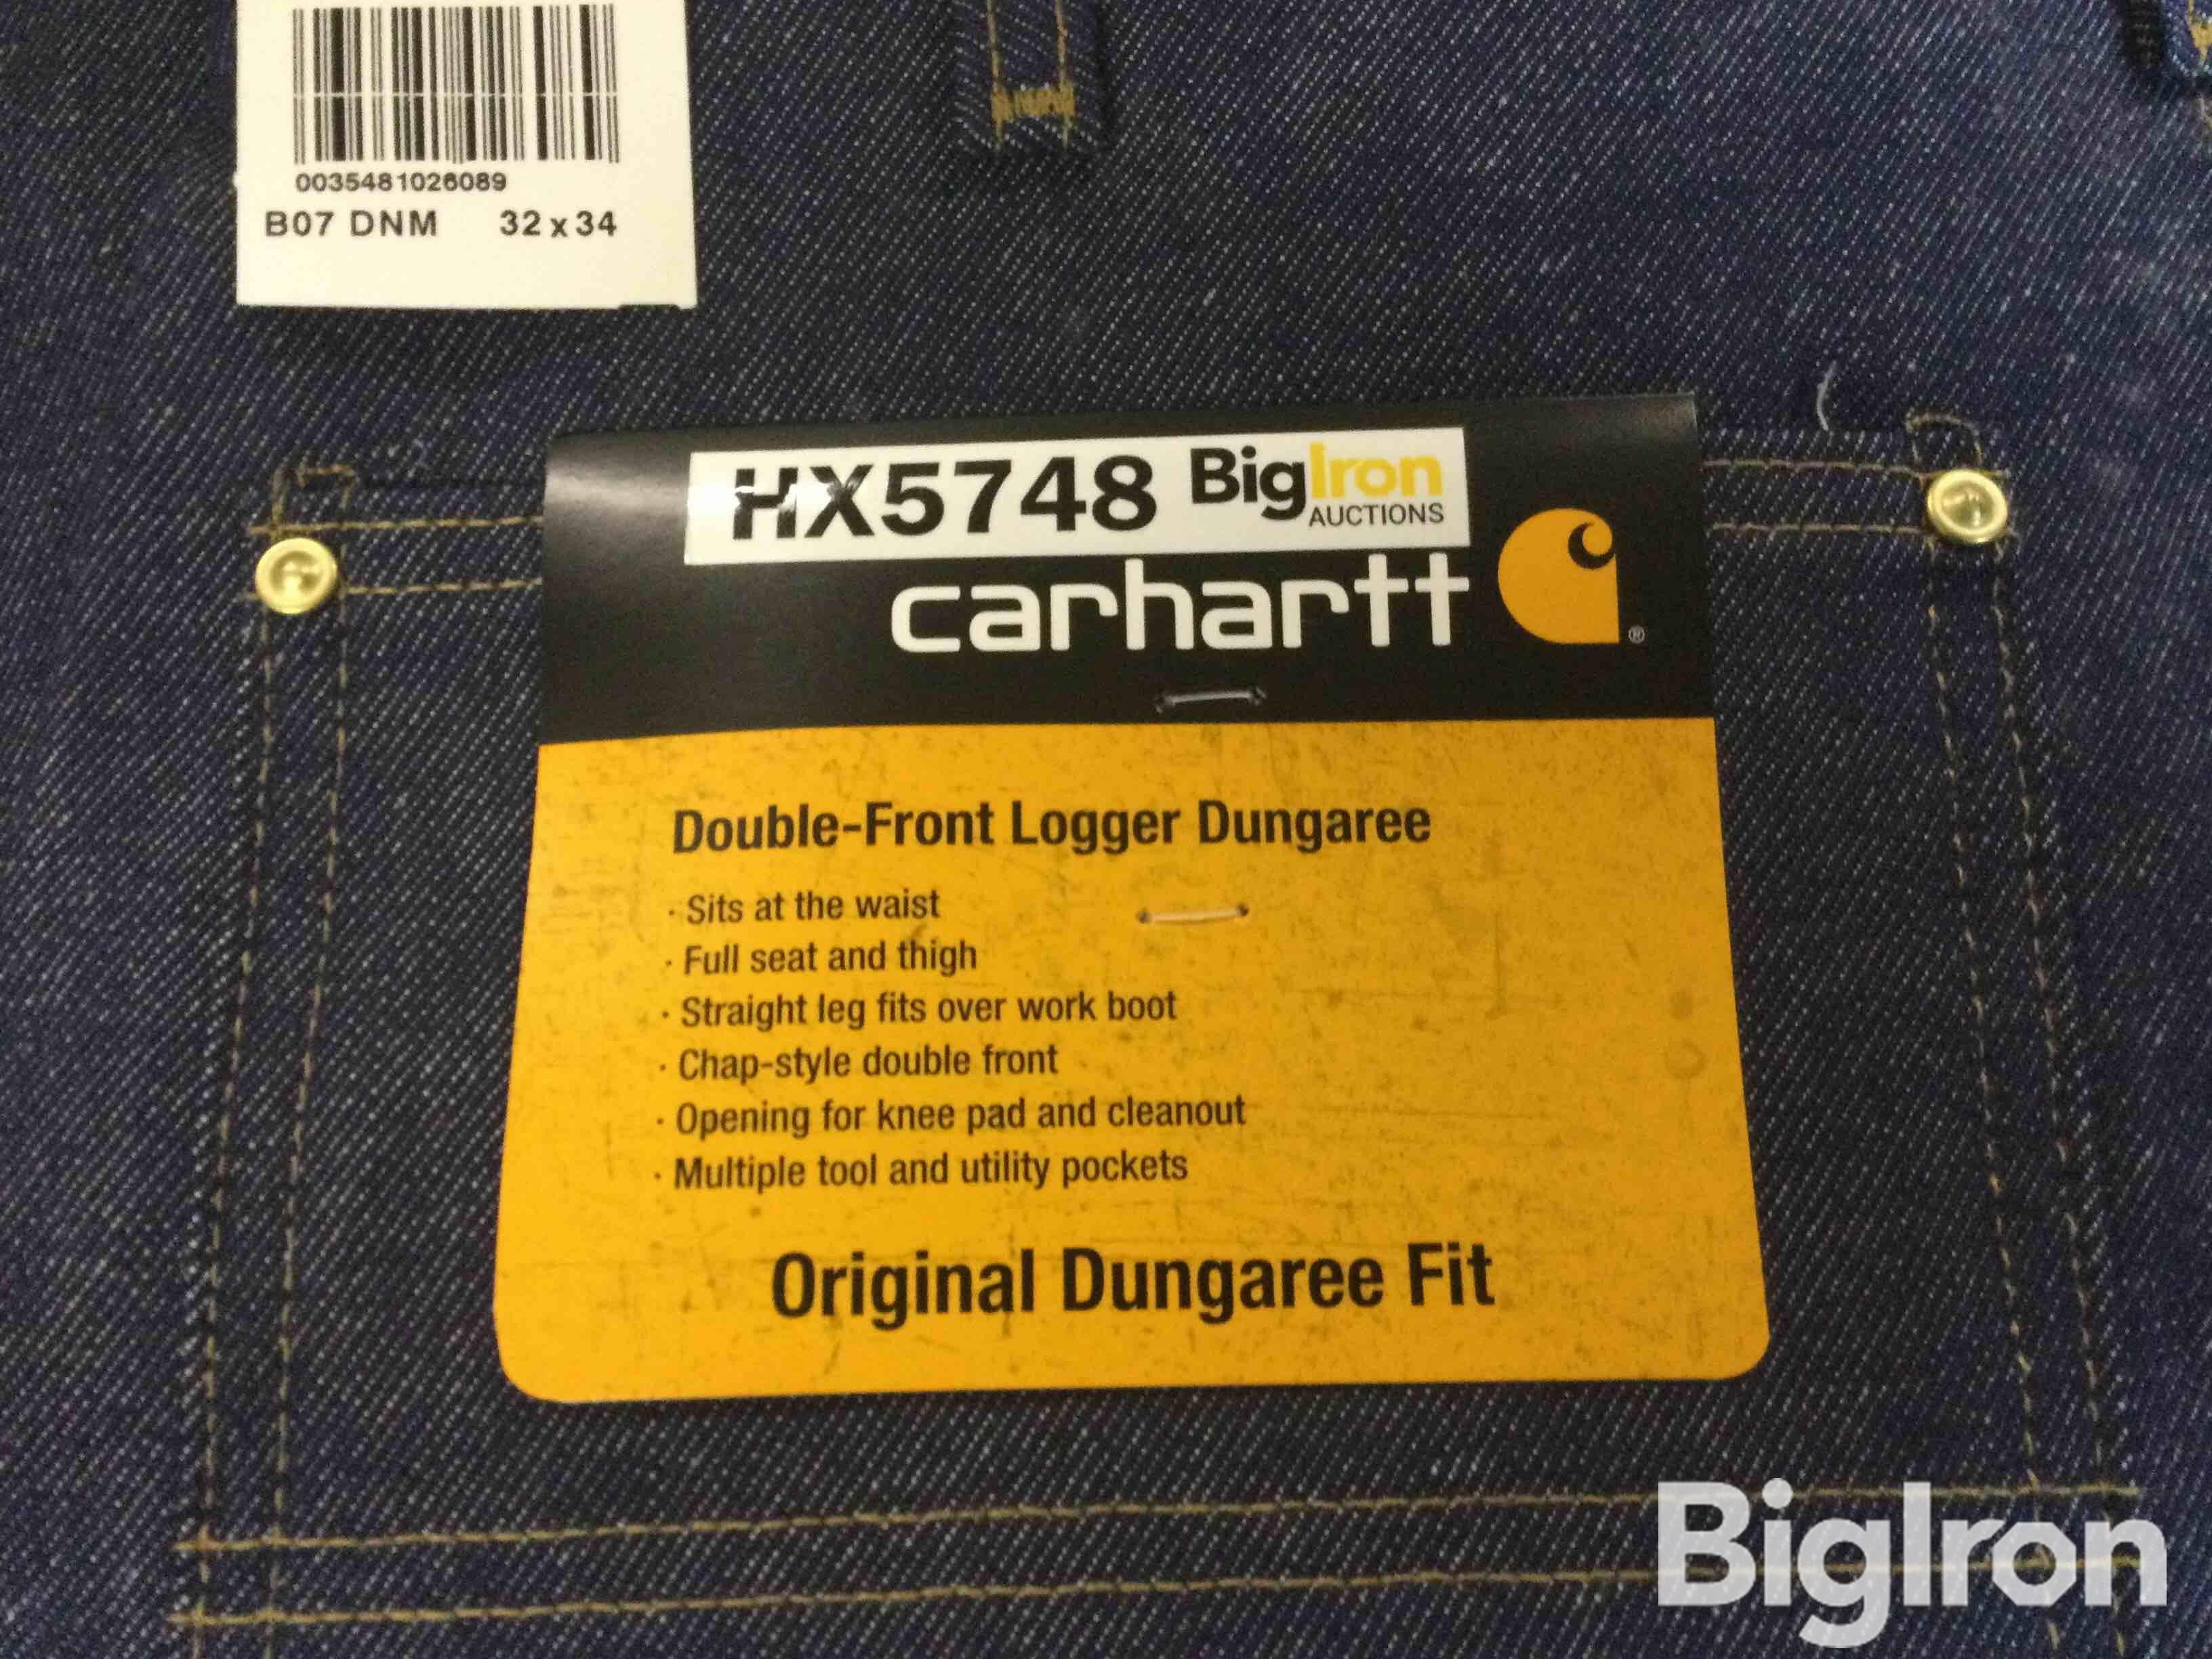 Carhartt 32x34 Double Front Logger Dungaree Jeans BigIron Auctions